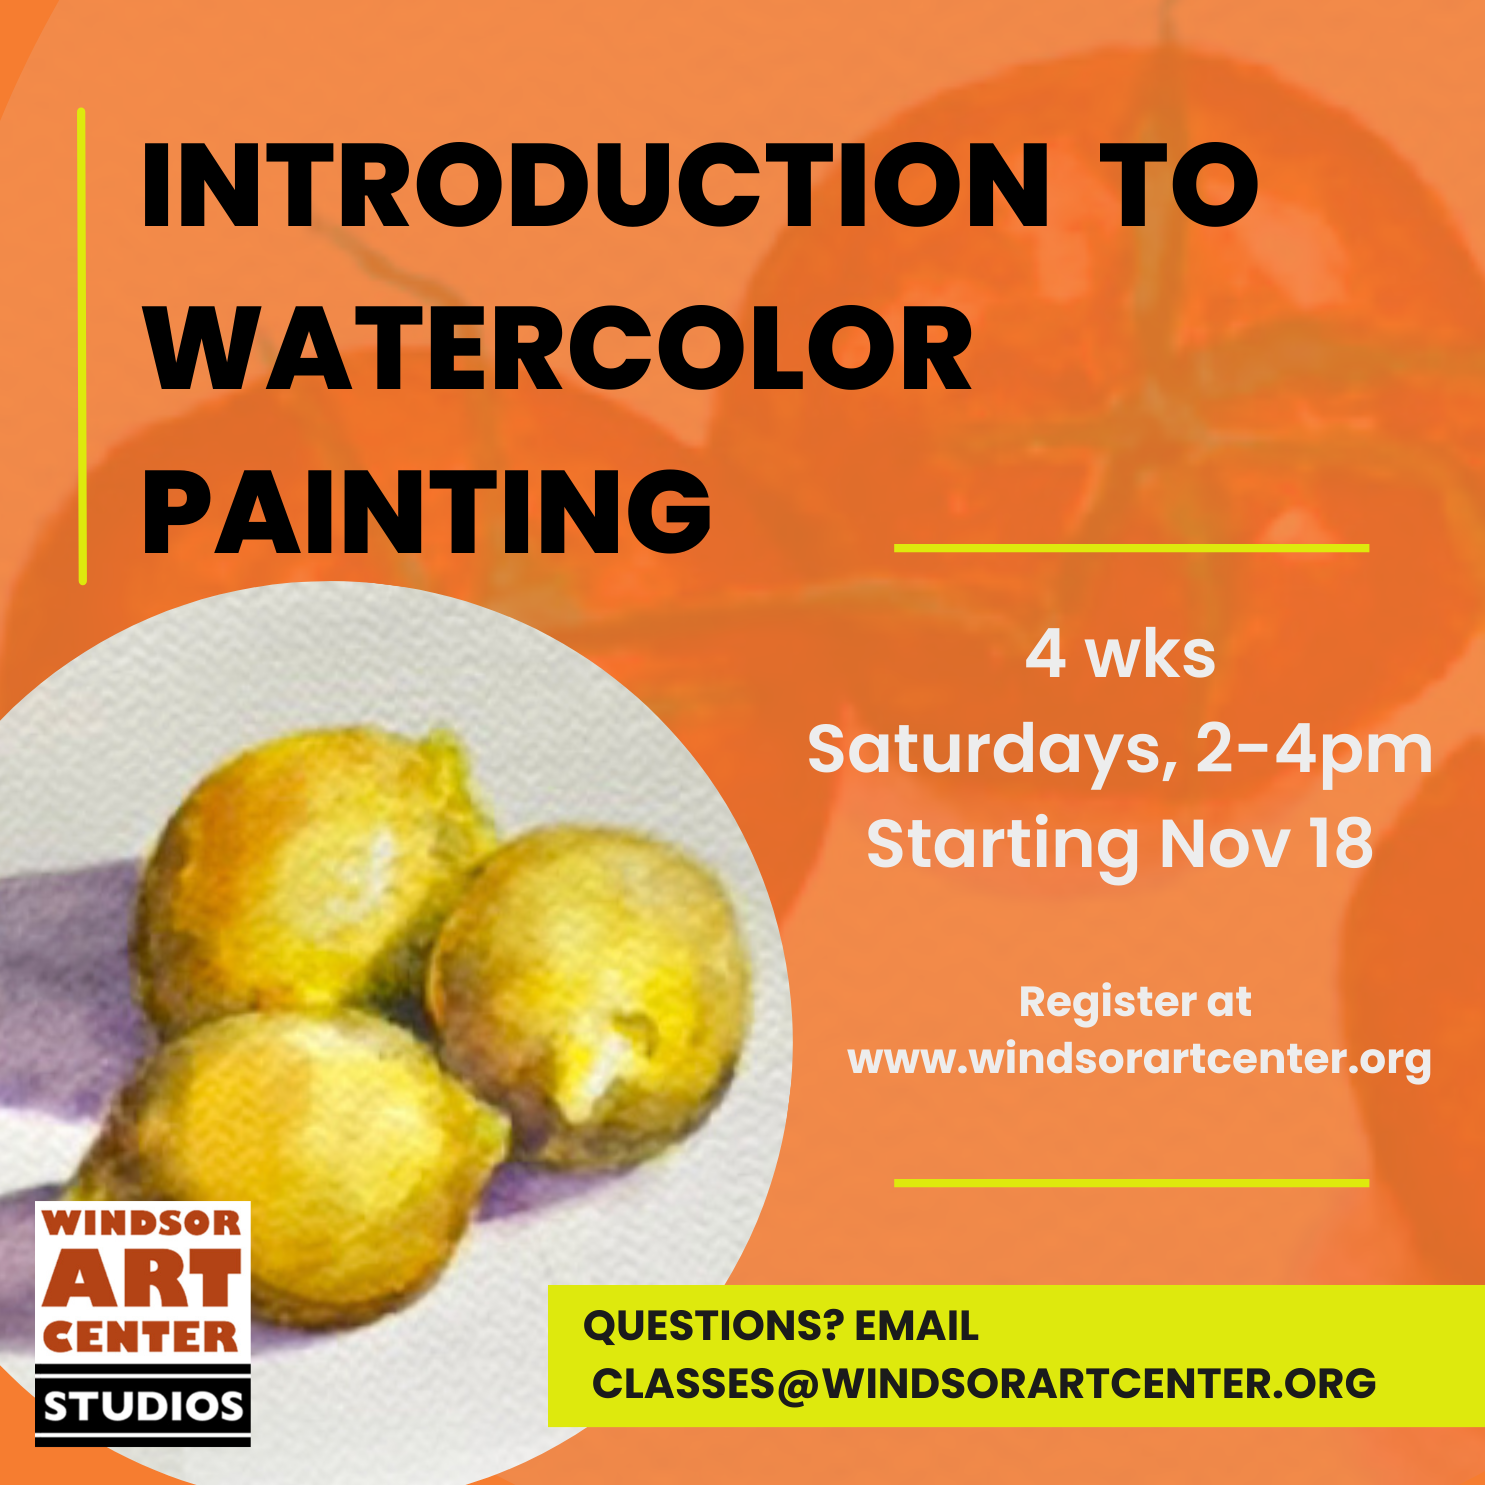 Introduction to Watercolor Painting